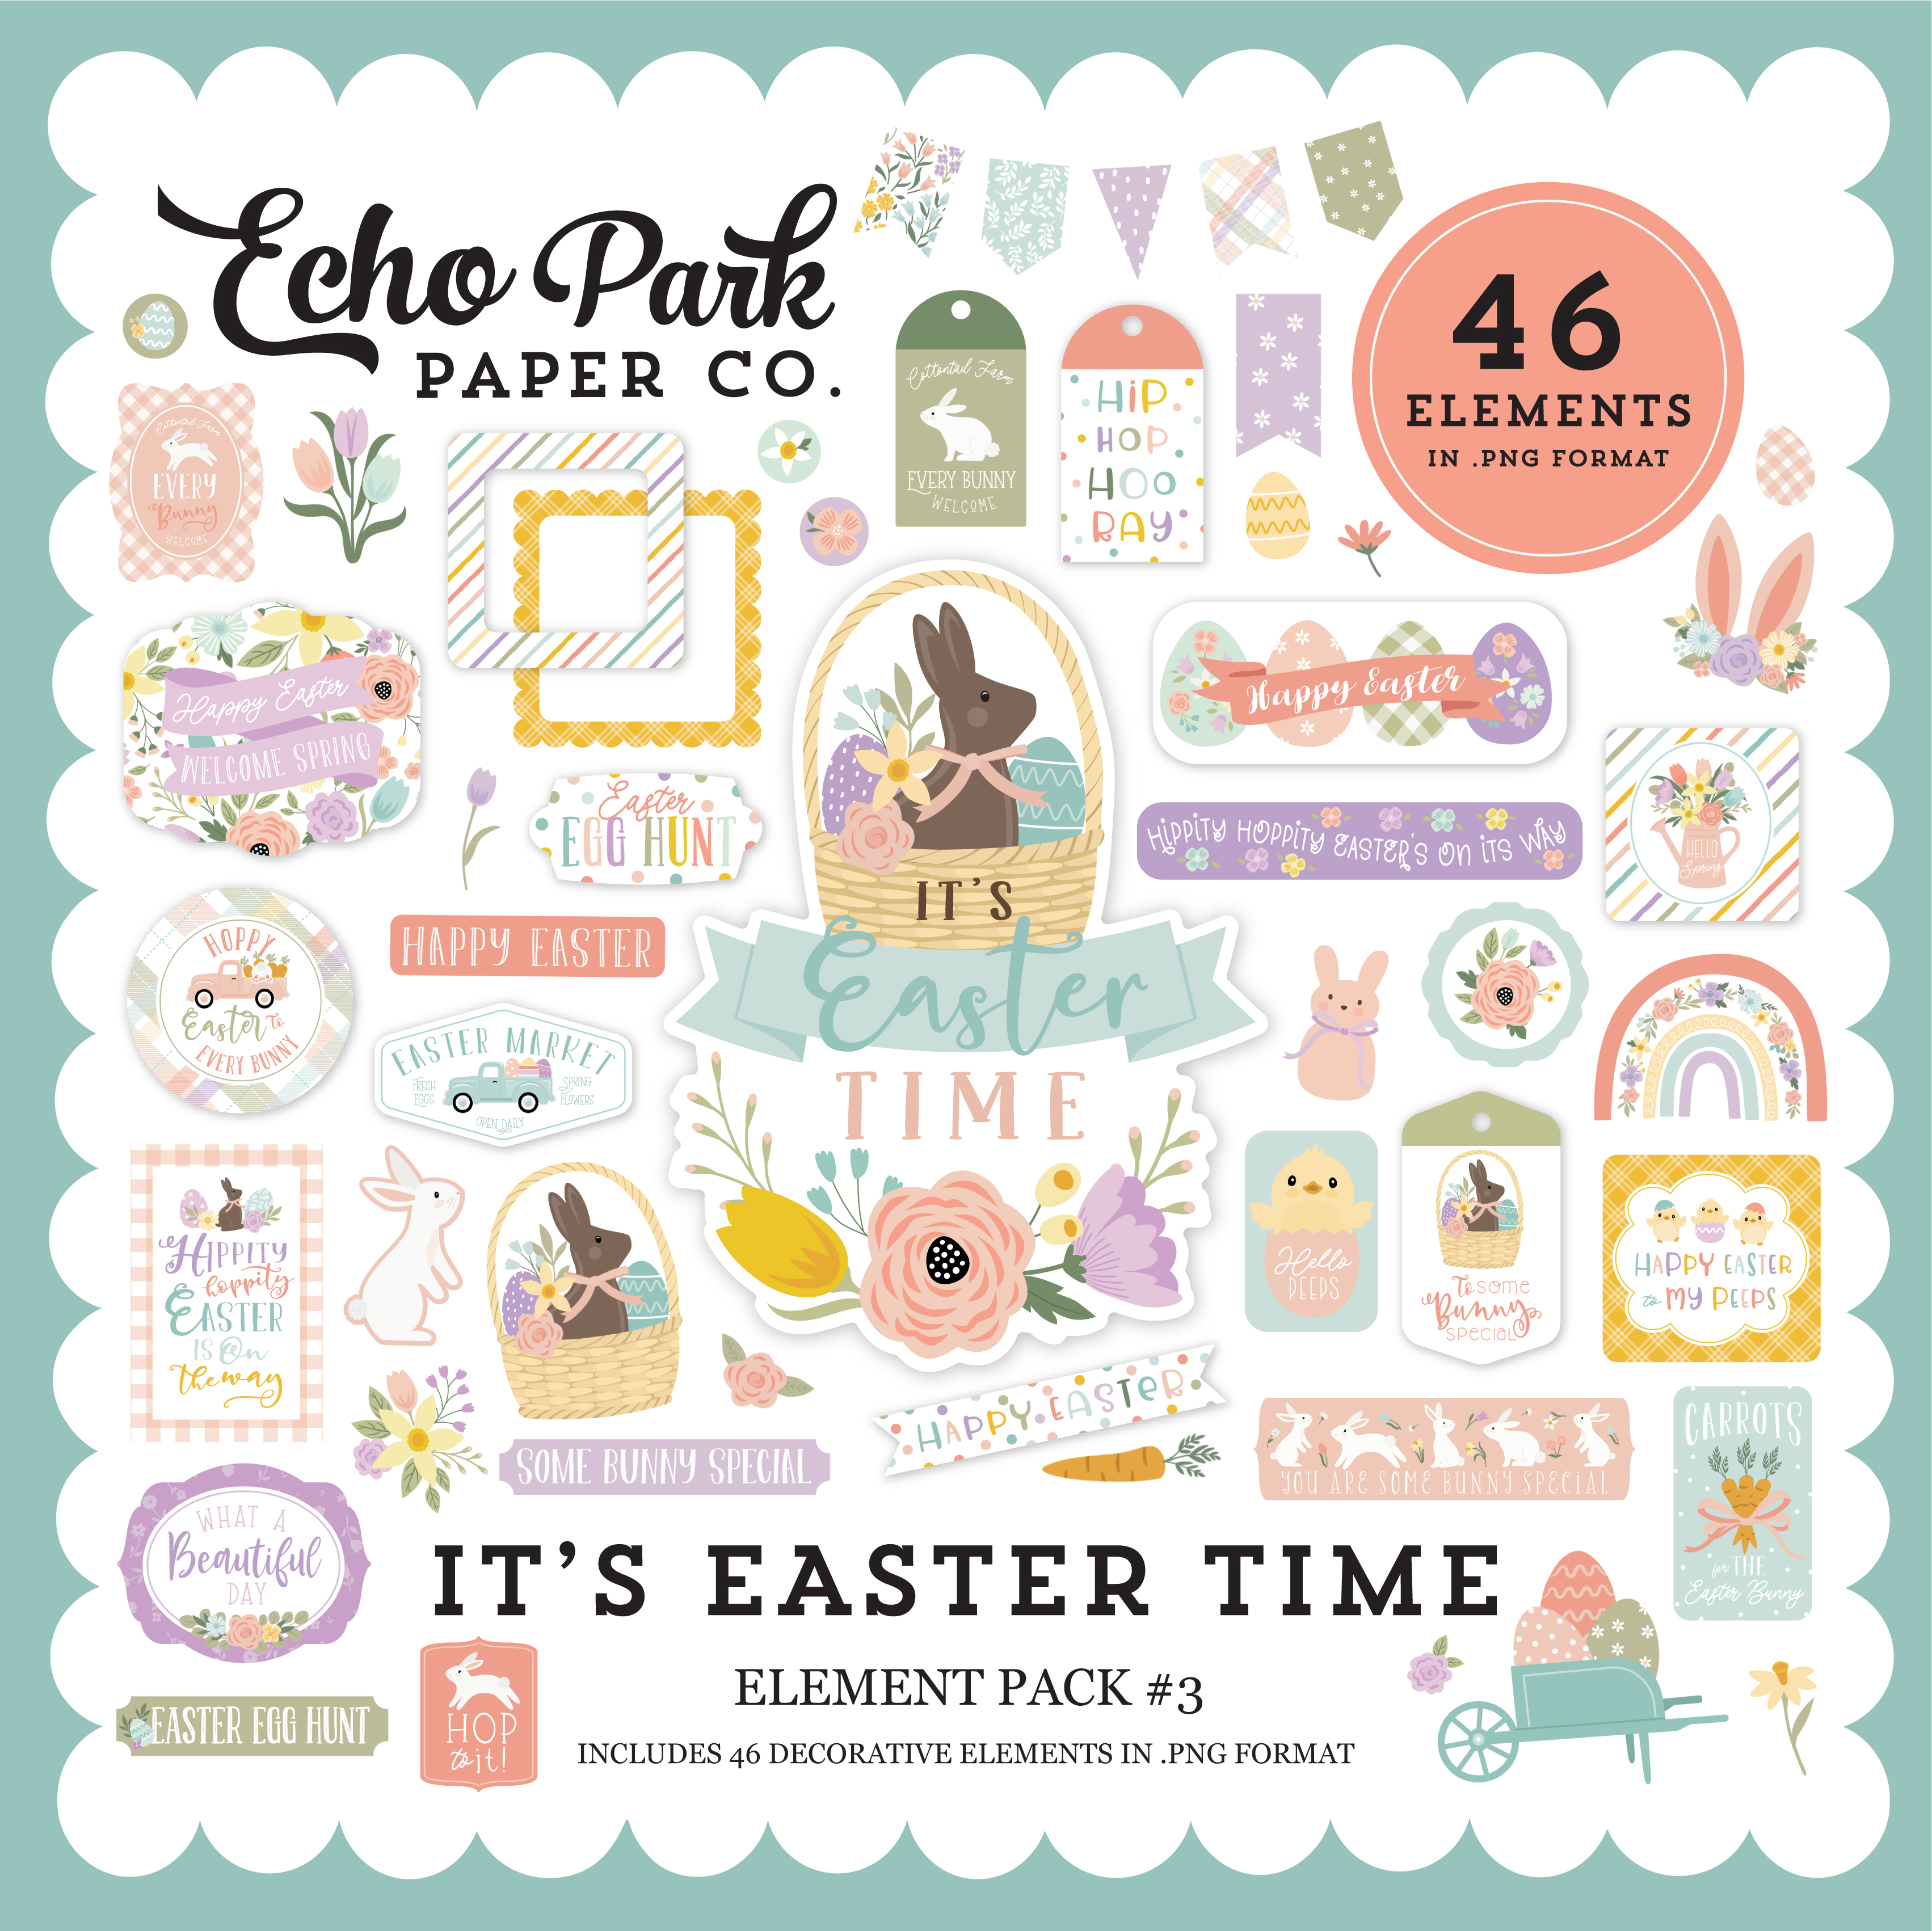 It's Easter Time Element Pack #3